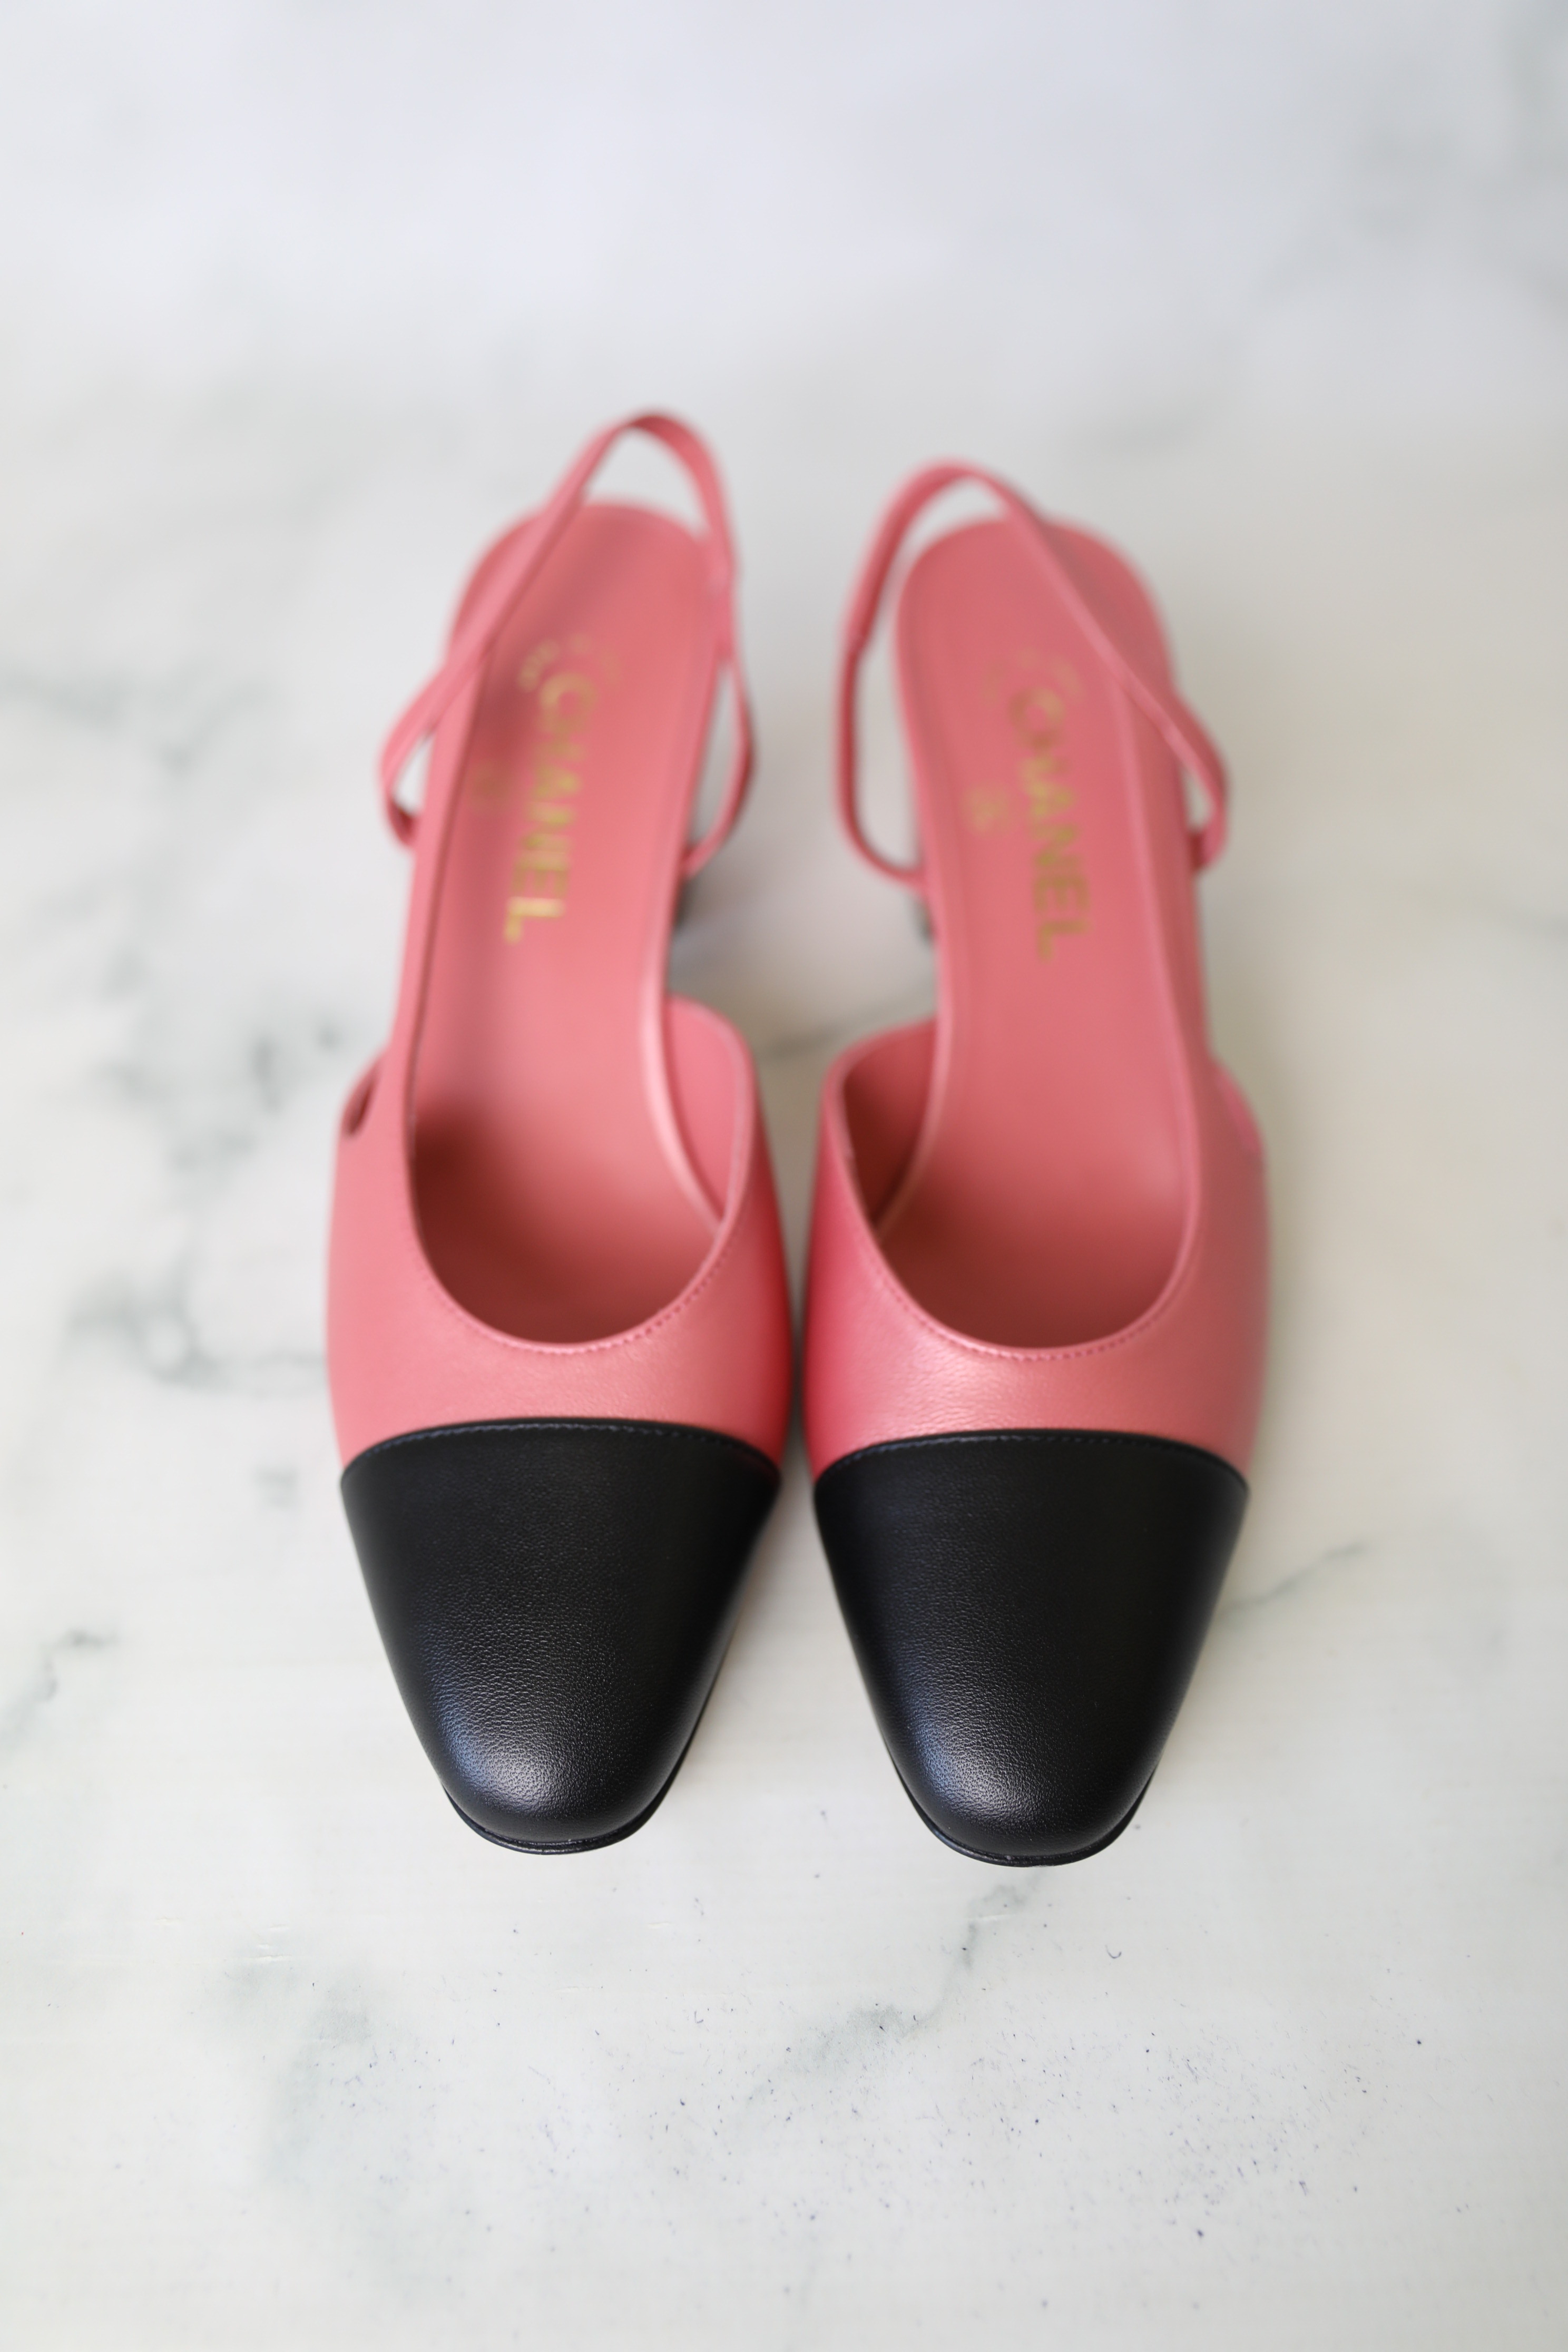 Chanel Slingback Pumps, Mid Heel, Pink and Black. Size 39.5, New